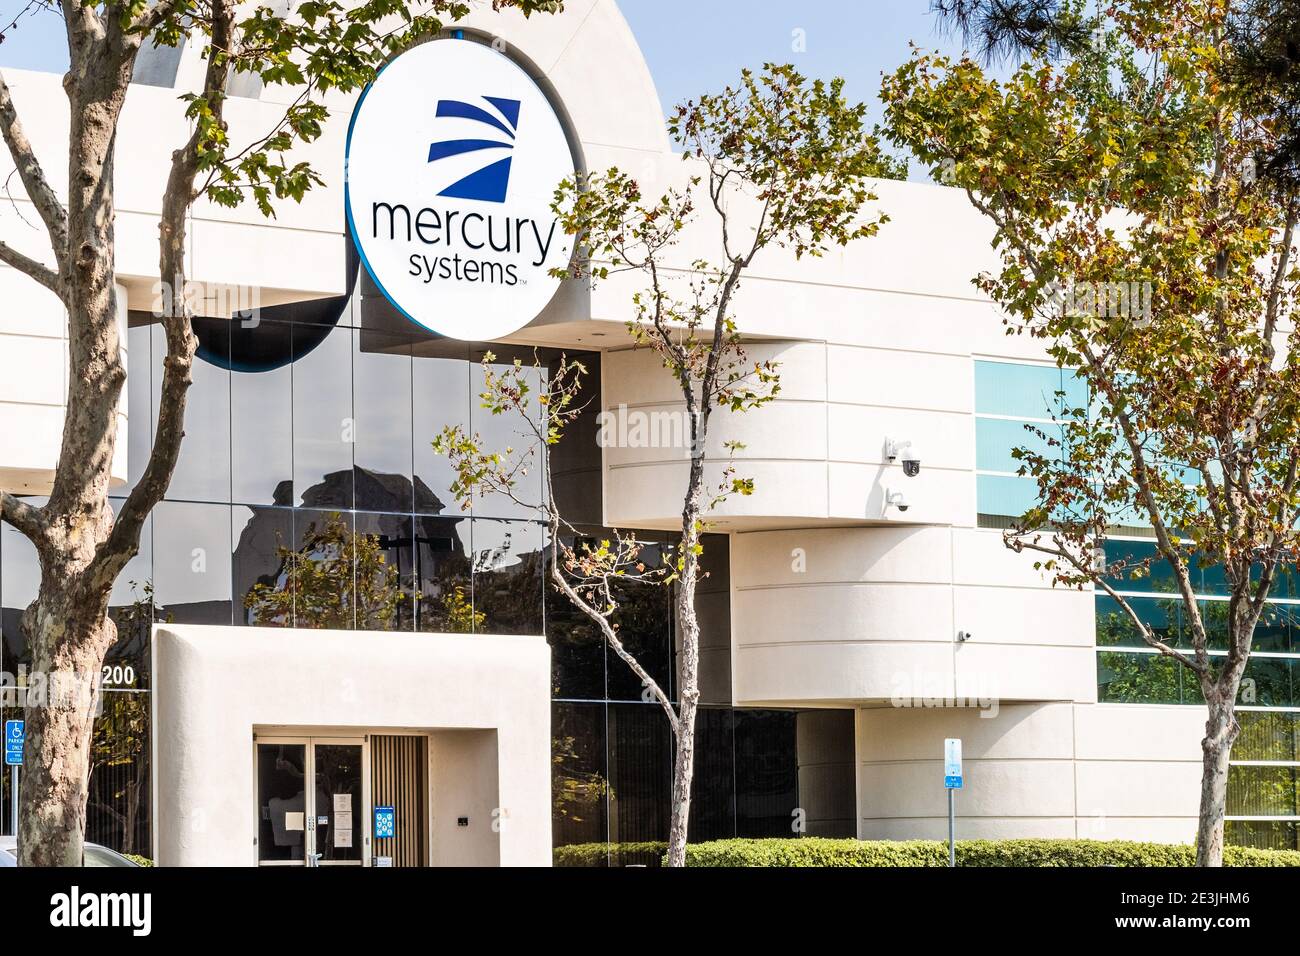 Sep 17, 2020 Fremont / CA / USA - Mercury Systems headquarters in Silicon Valley; Mercury Systems, Inc. is an American multinational aerospace and def Stock Photo